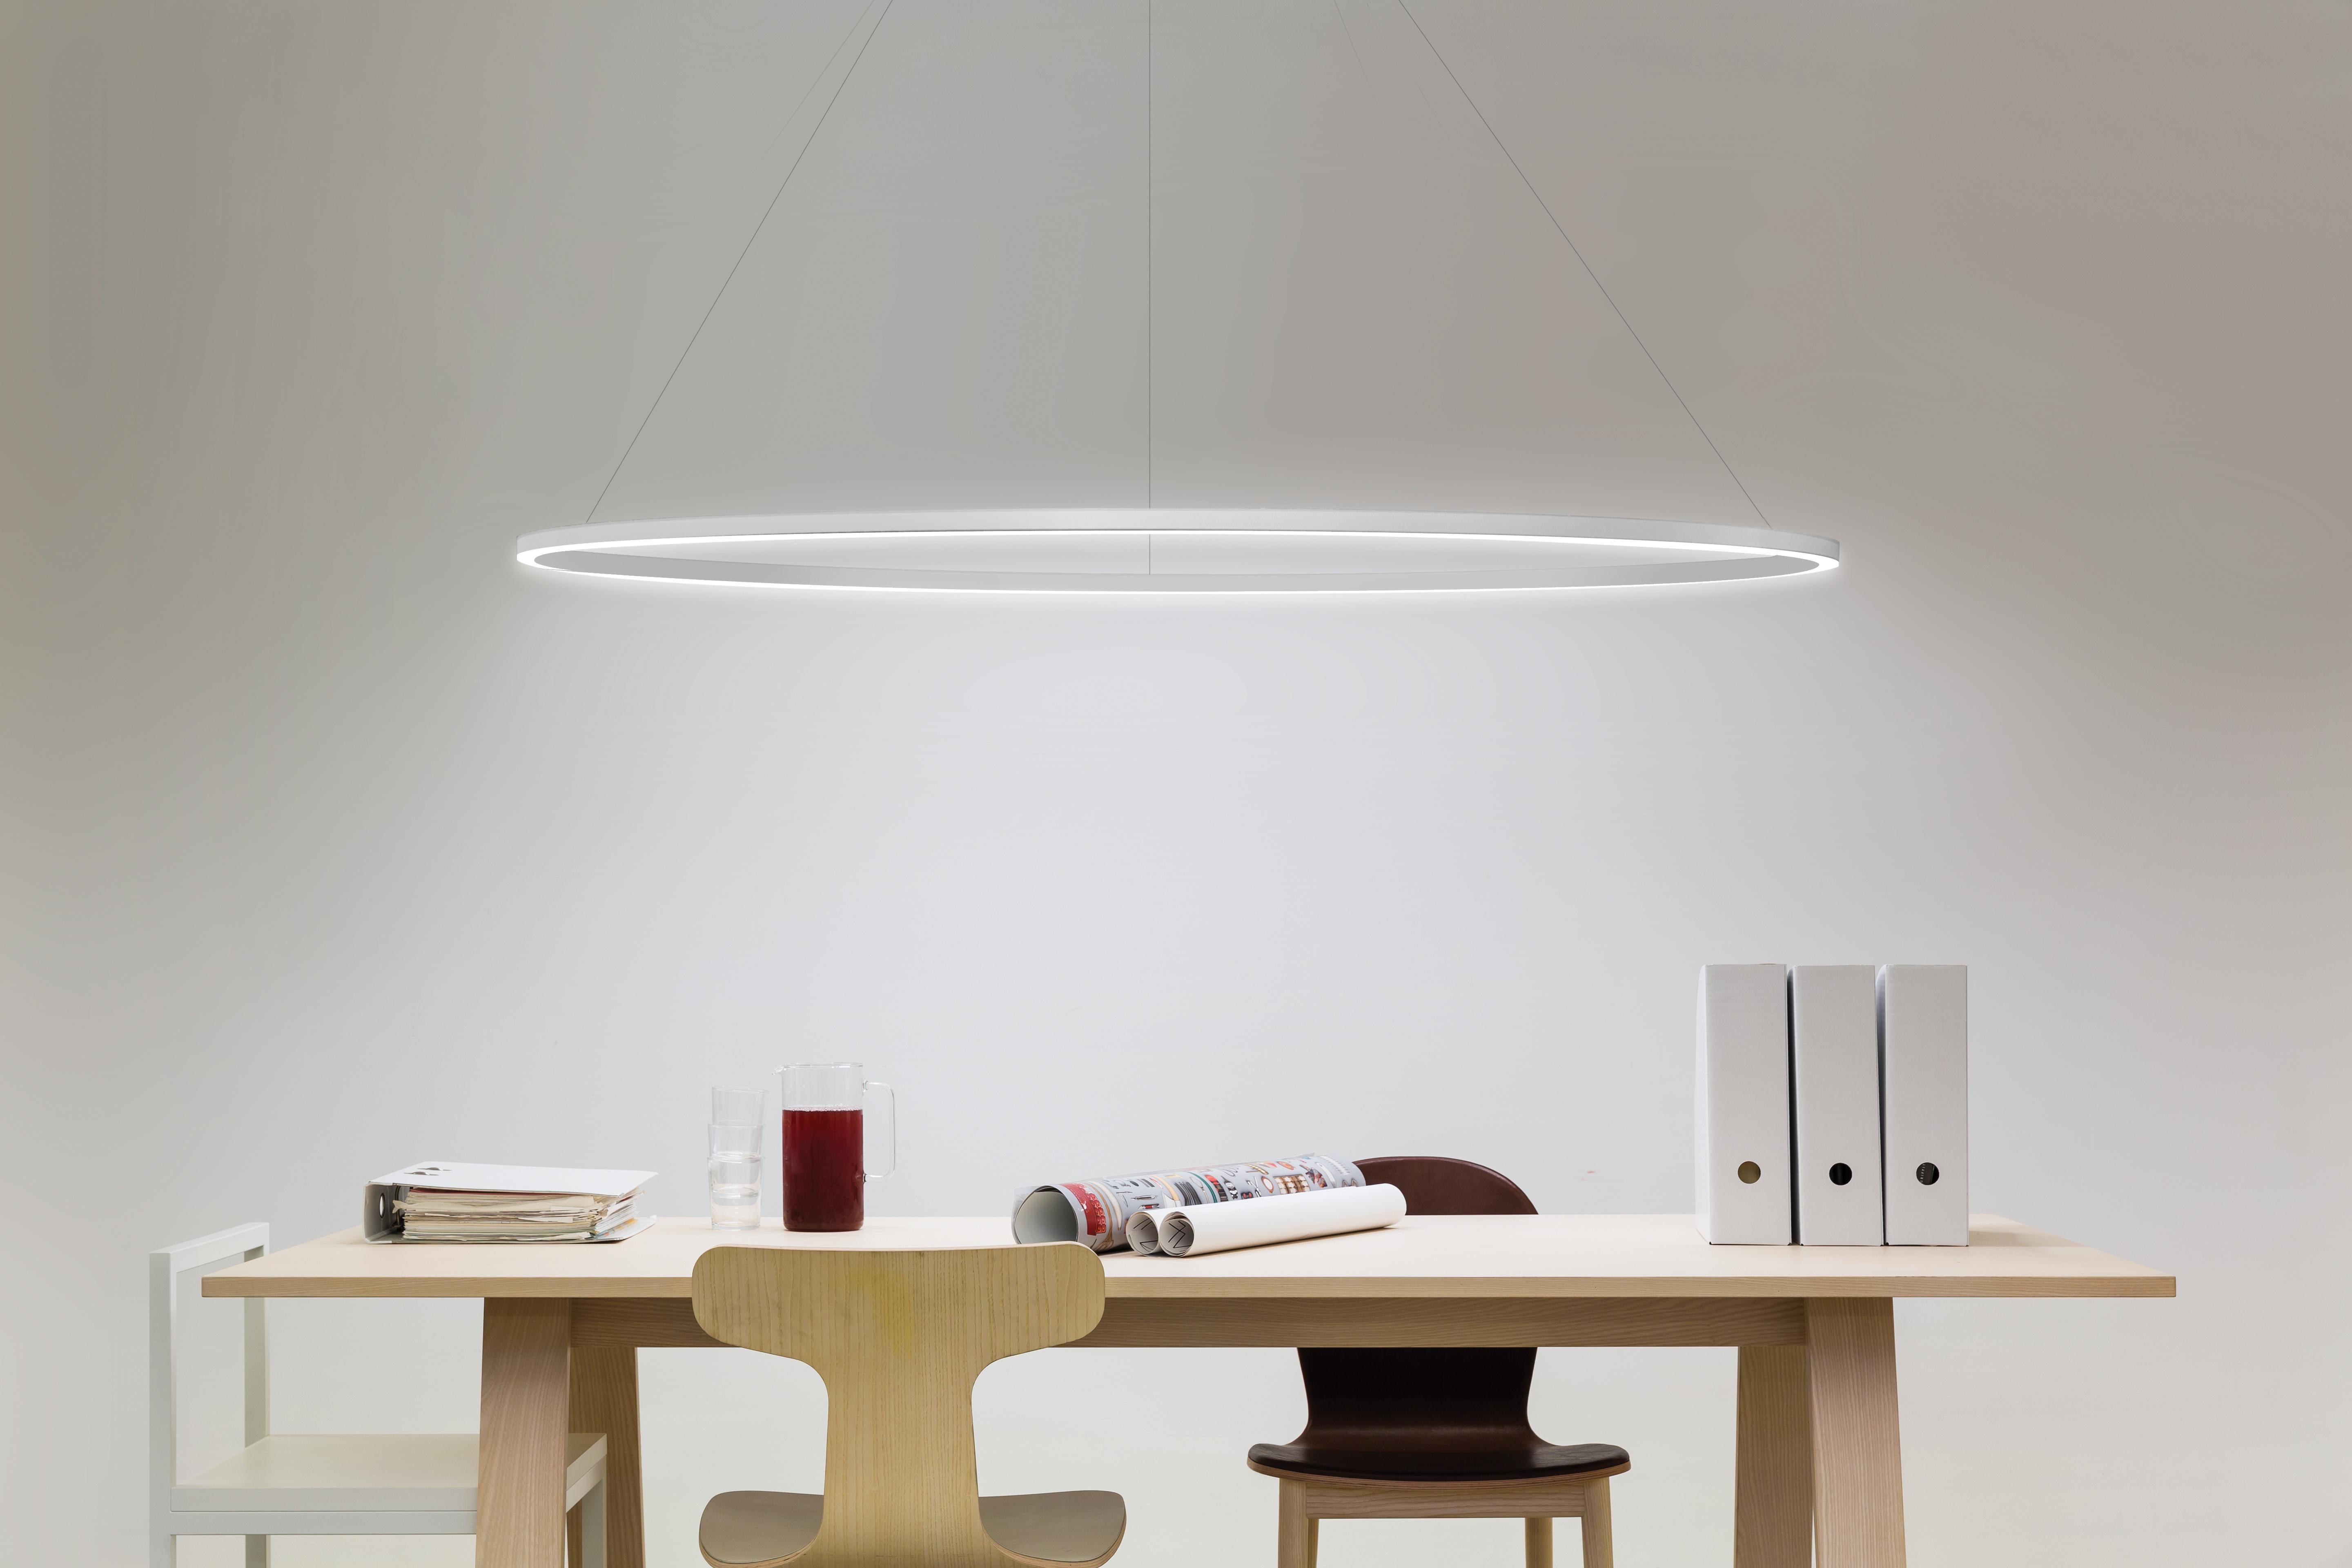 Collection of LED suspension lamps in extruded aluminum made in different versions: minor, major, double and the new 